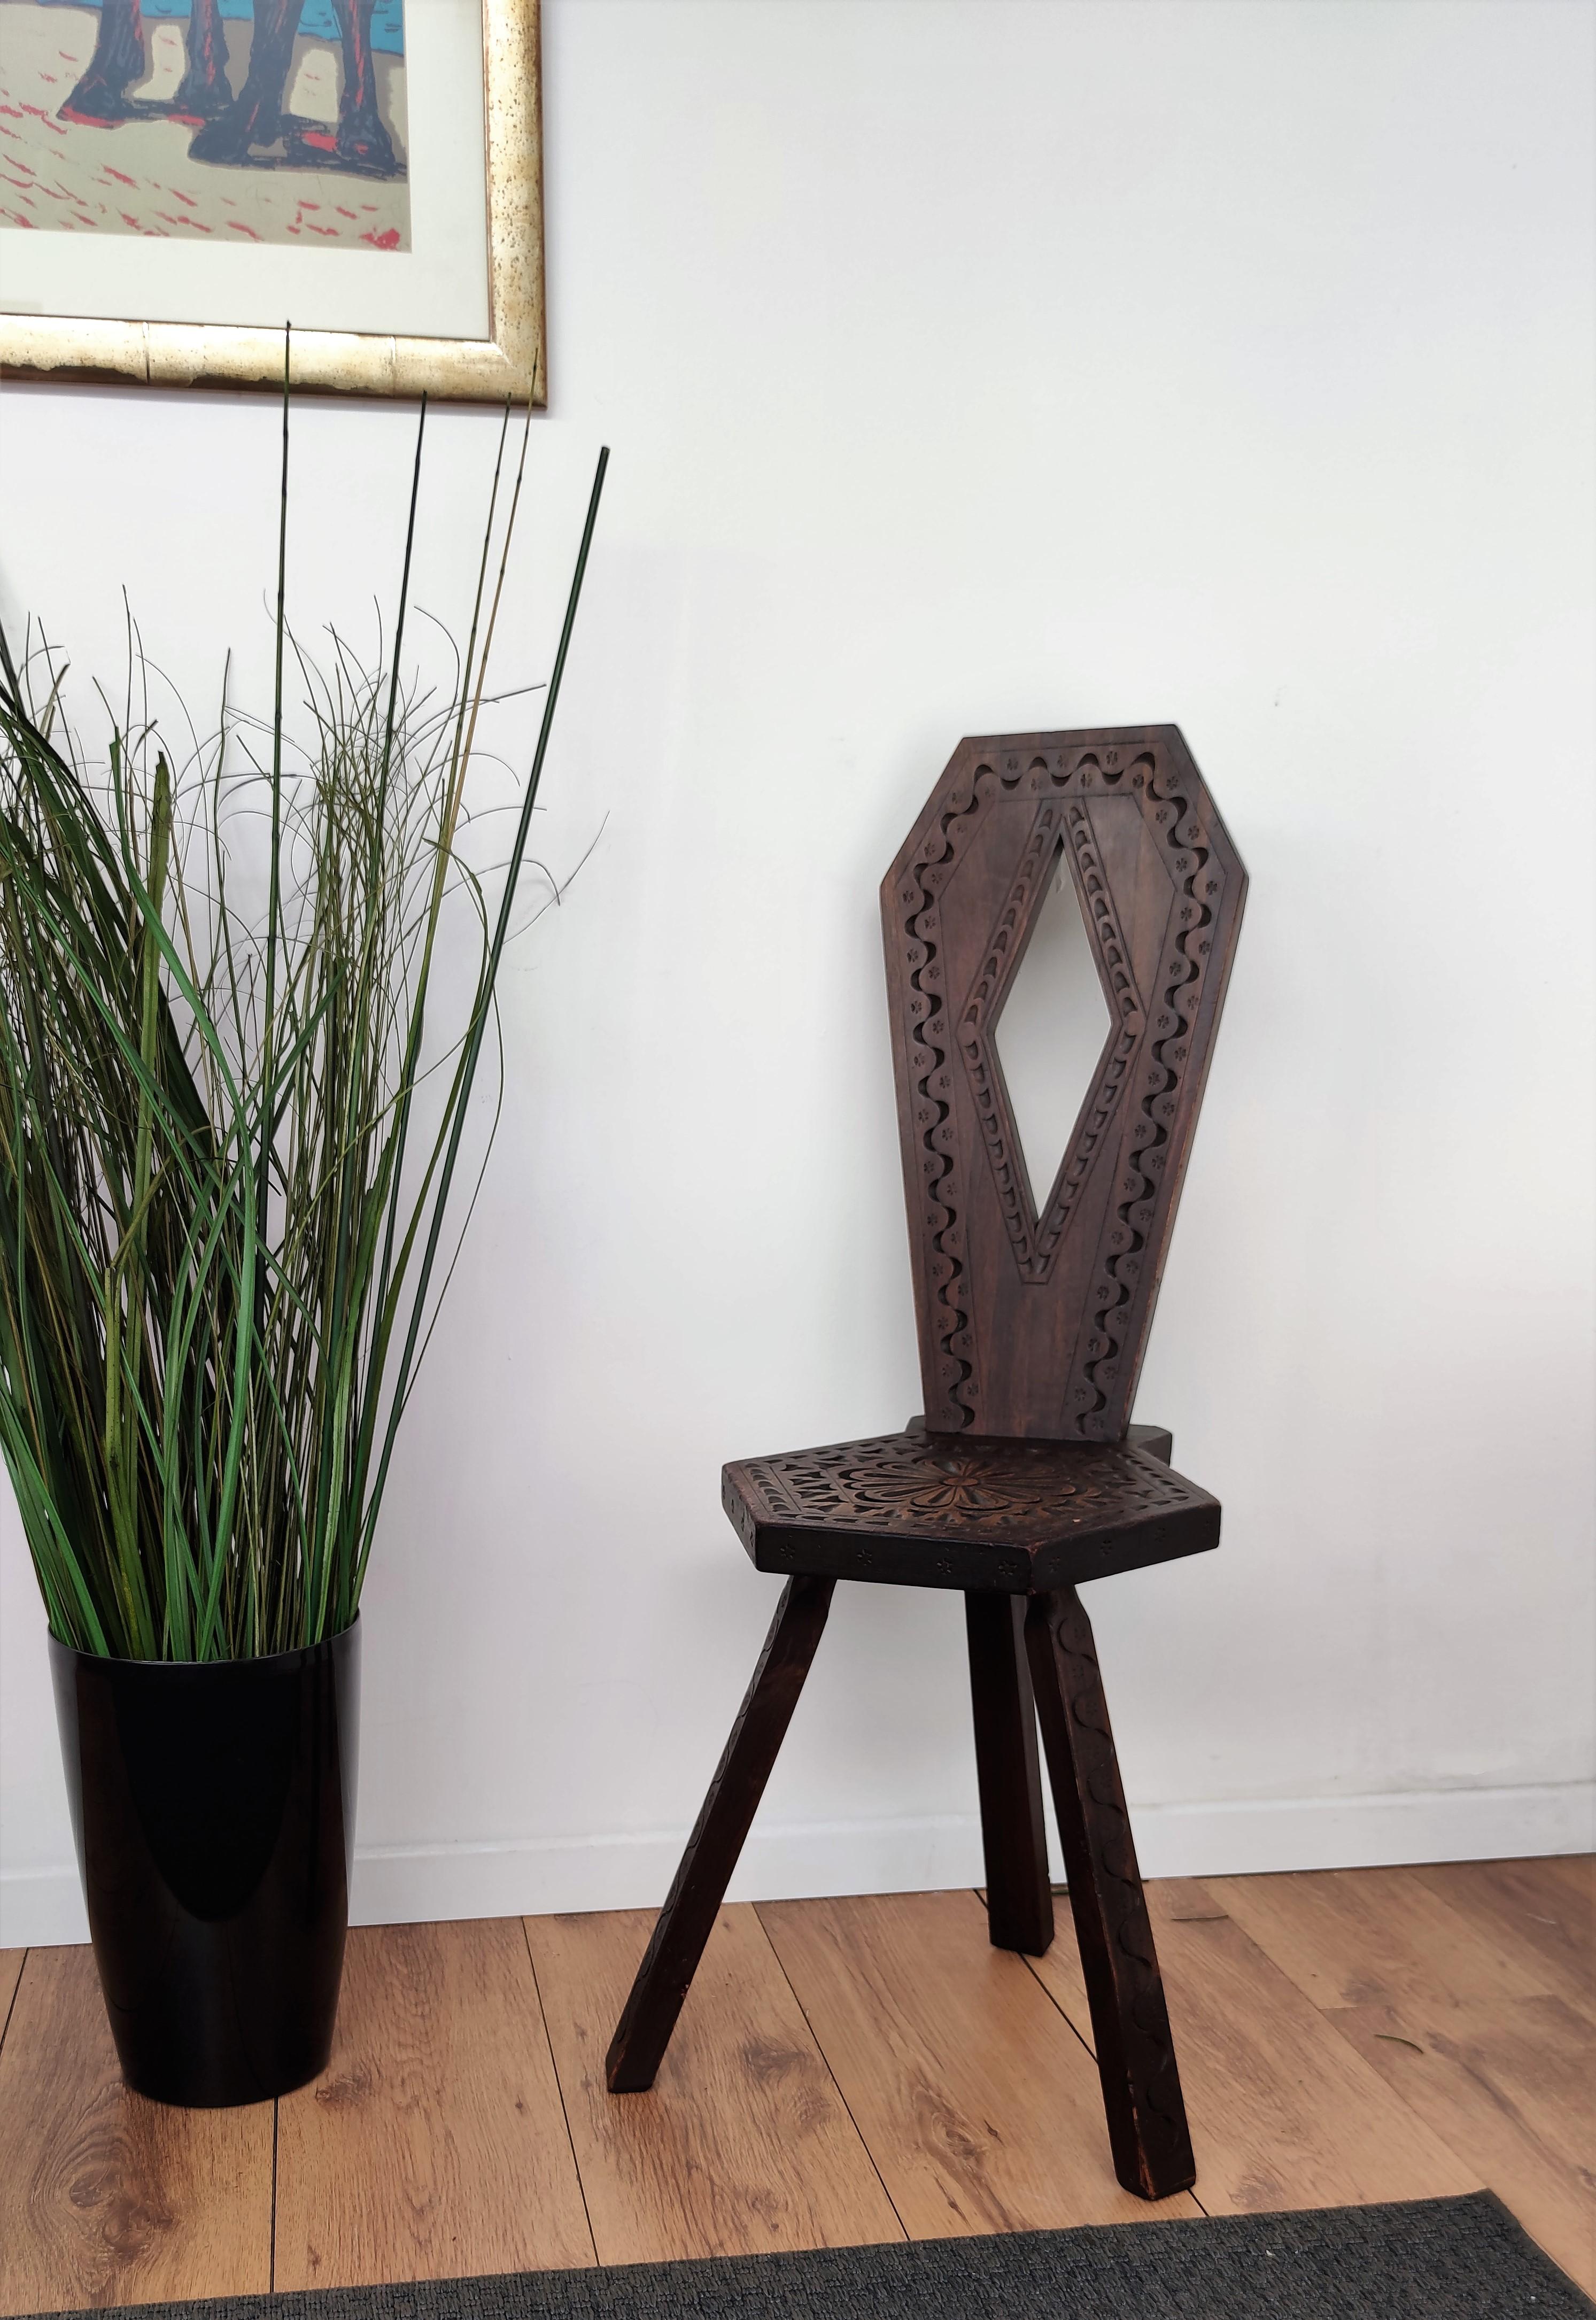 Beautiful Italian tripod chair in carved wood with round top seat, great back and detailed carving on each of the three legs. The back part is fixed in antique traditional method simply by two hand-inserted sticks. Great piece in any style decor and